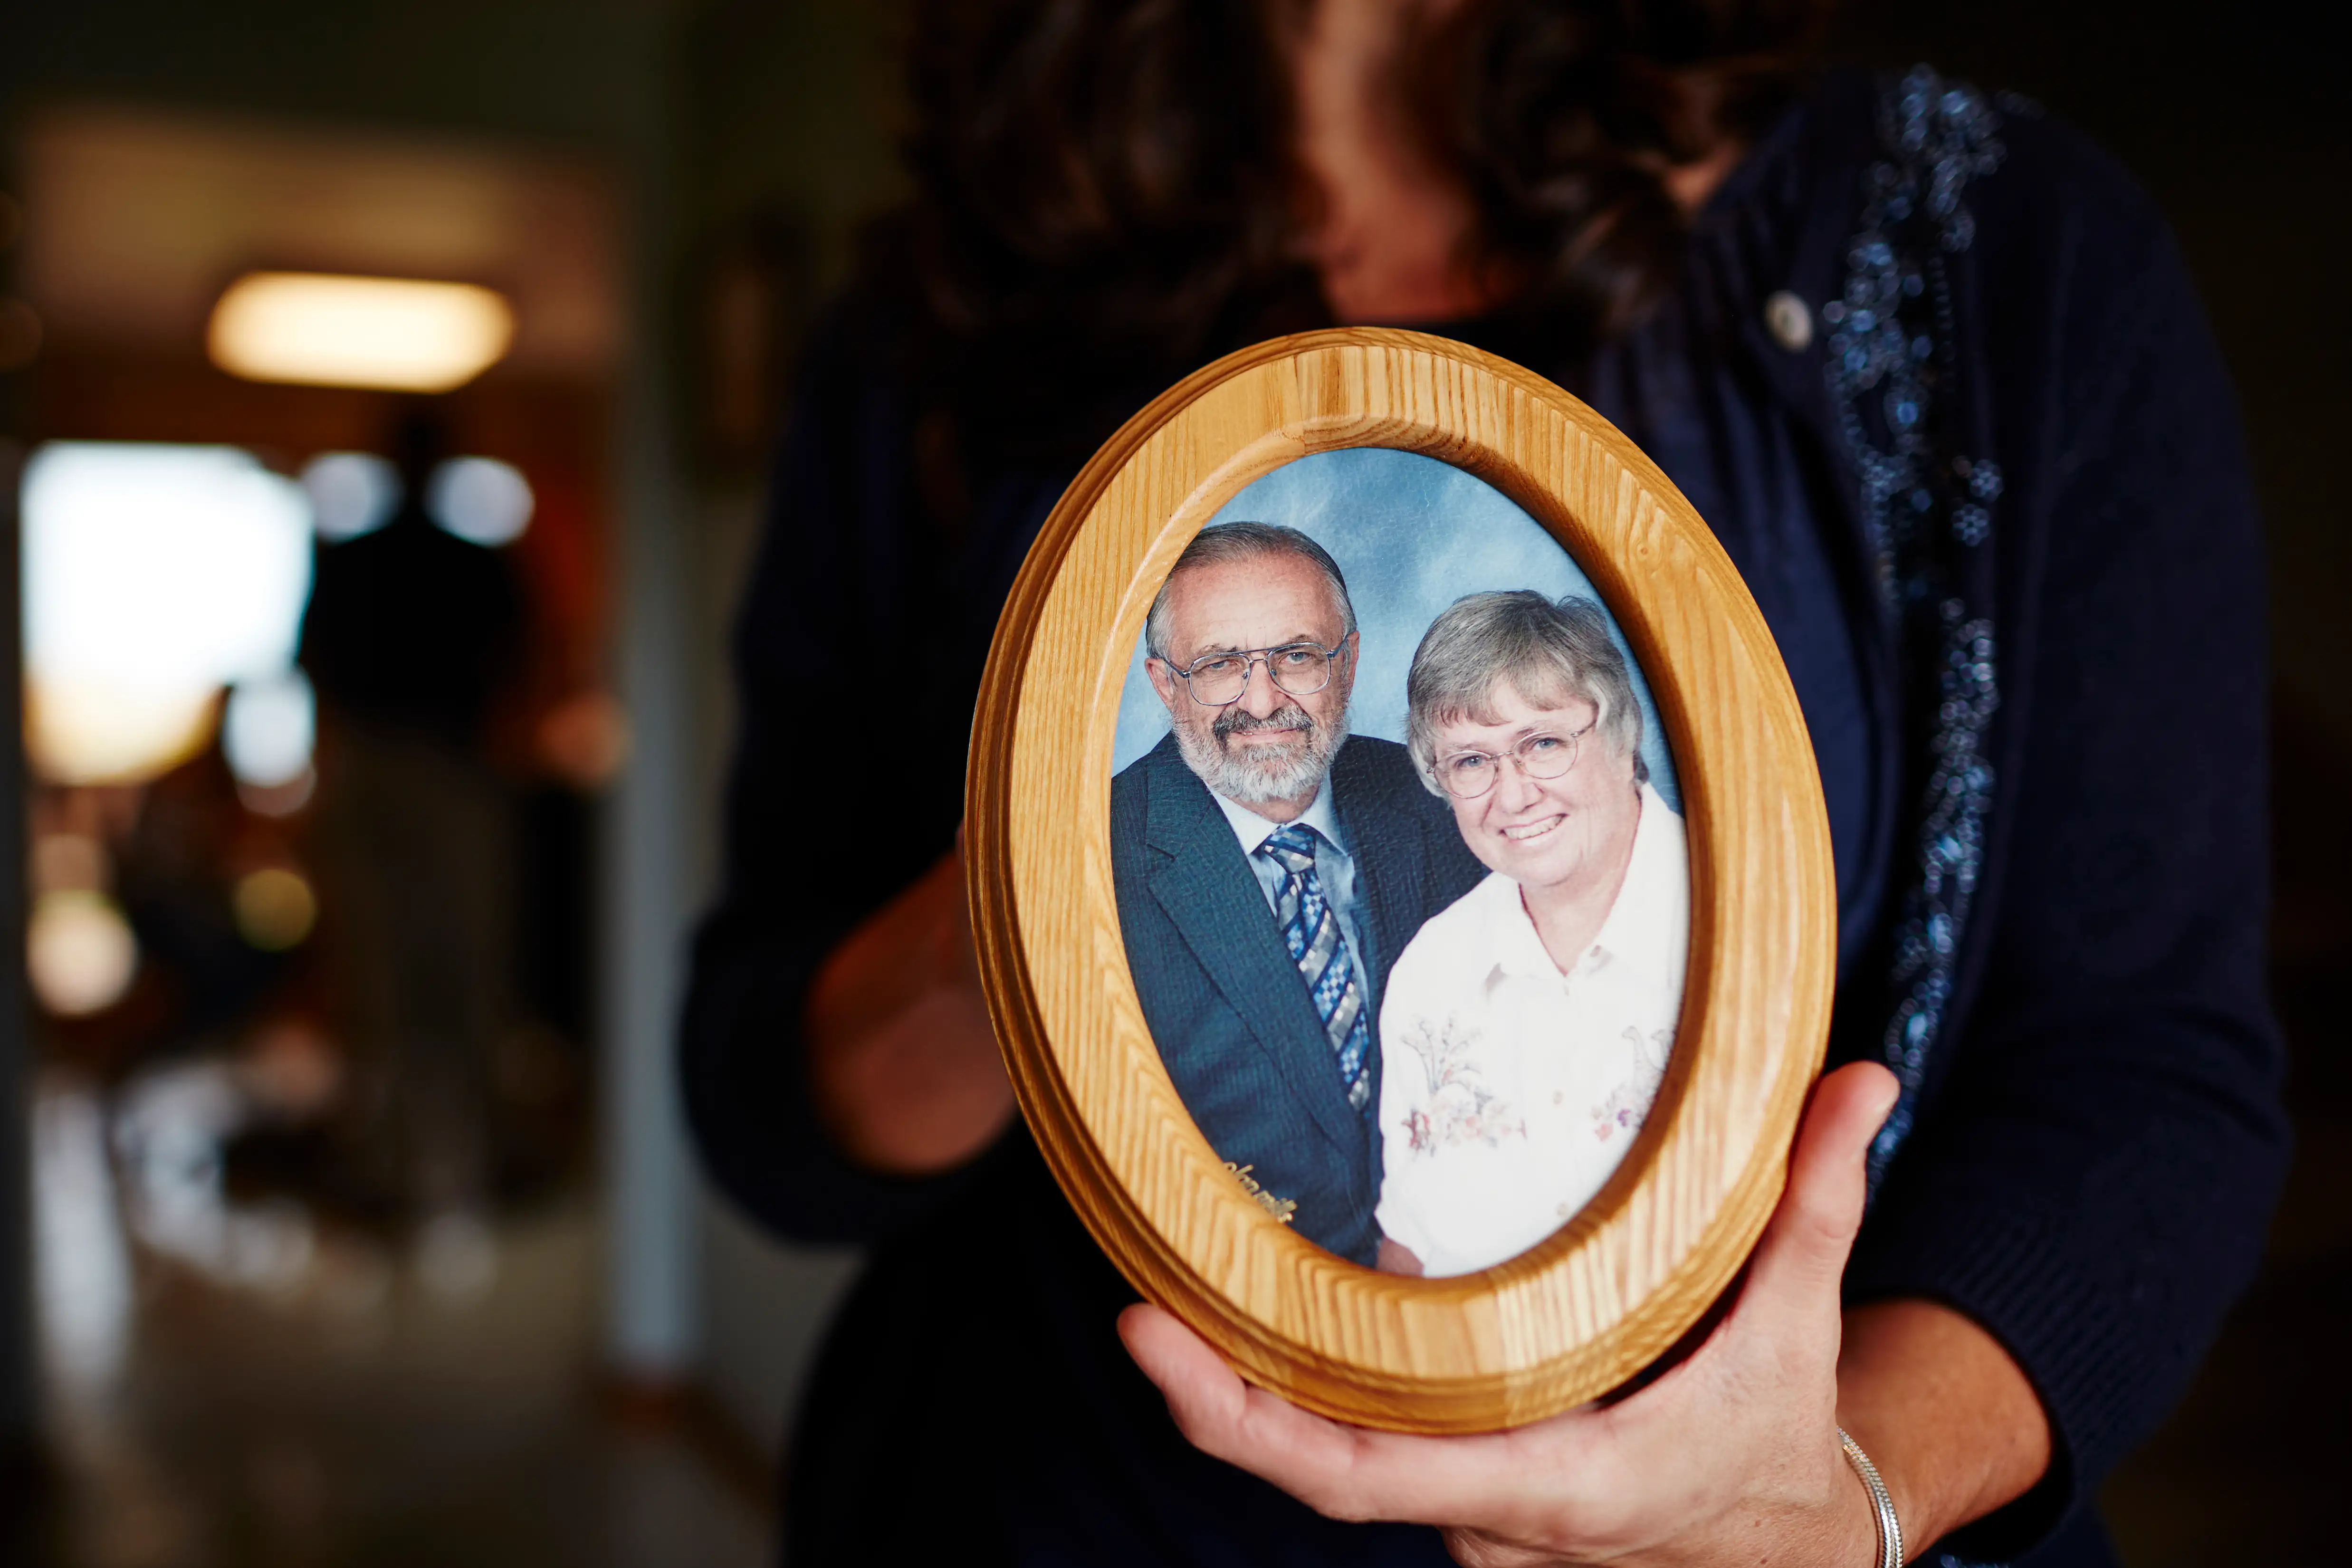 Theresa Von Vreckin holds a photo of her parents